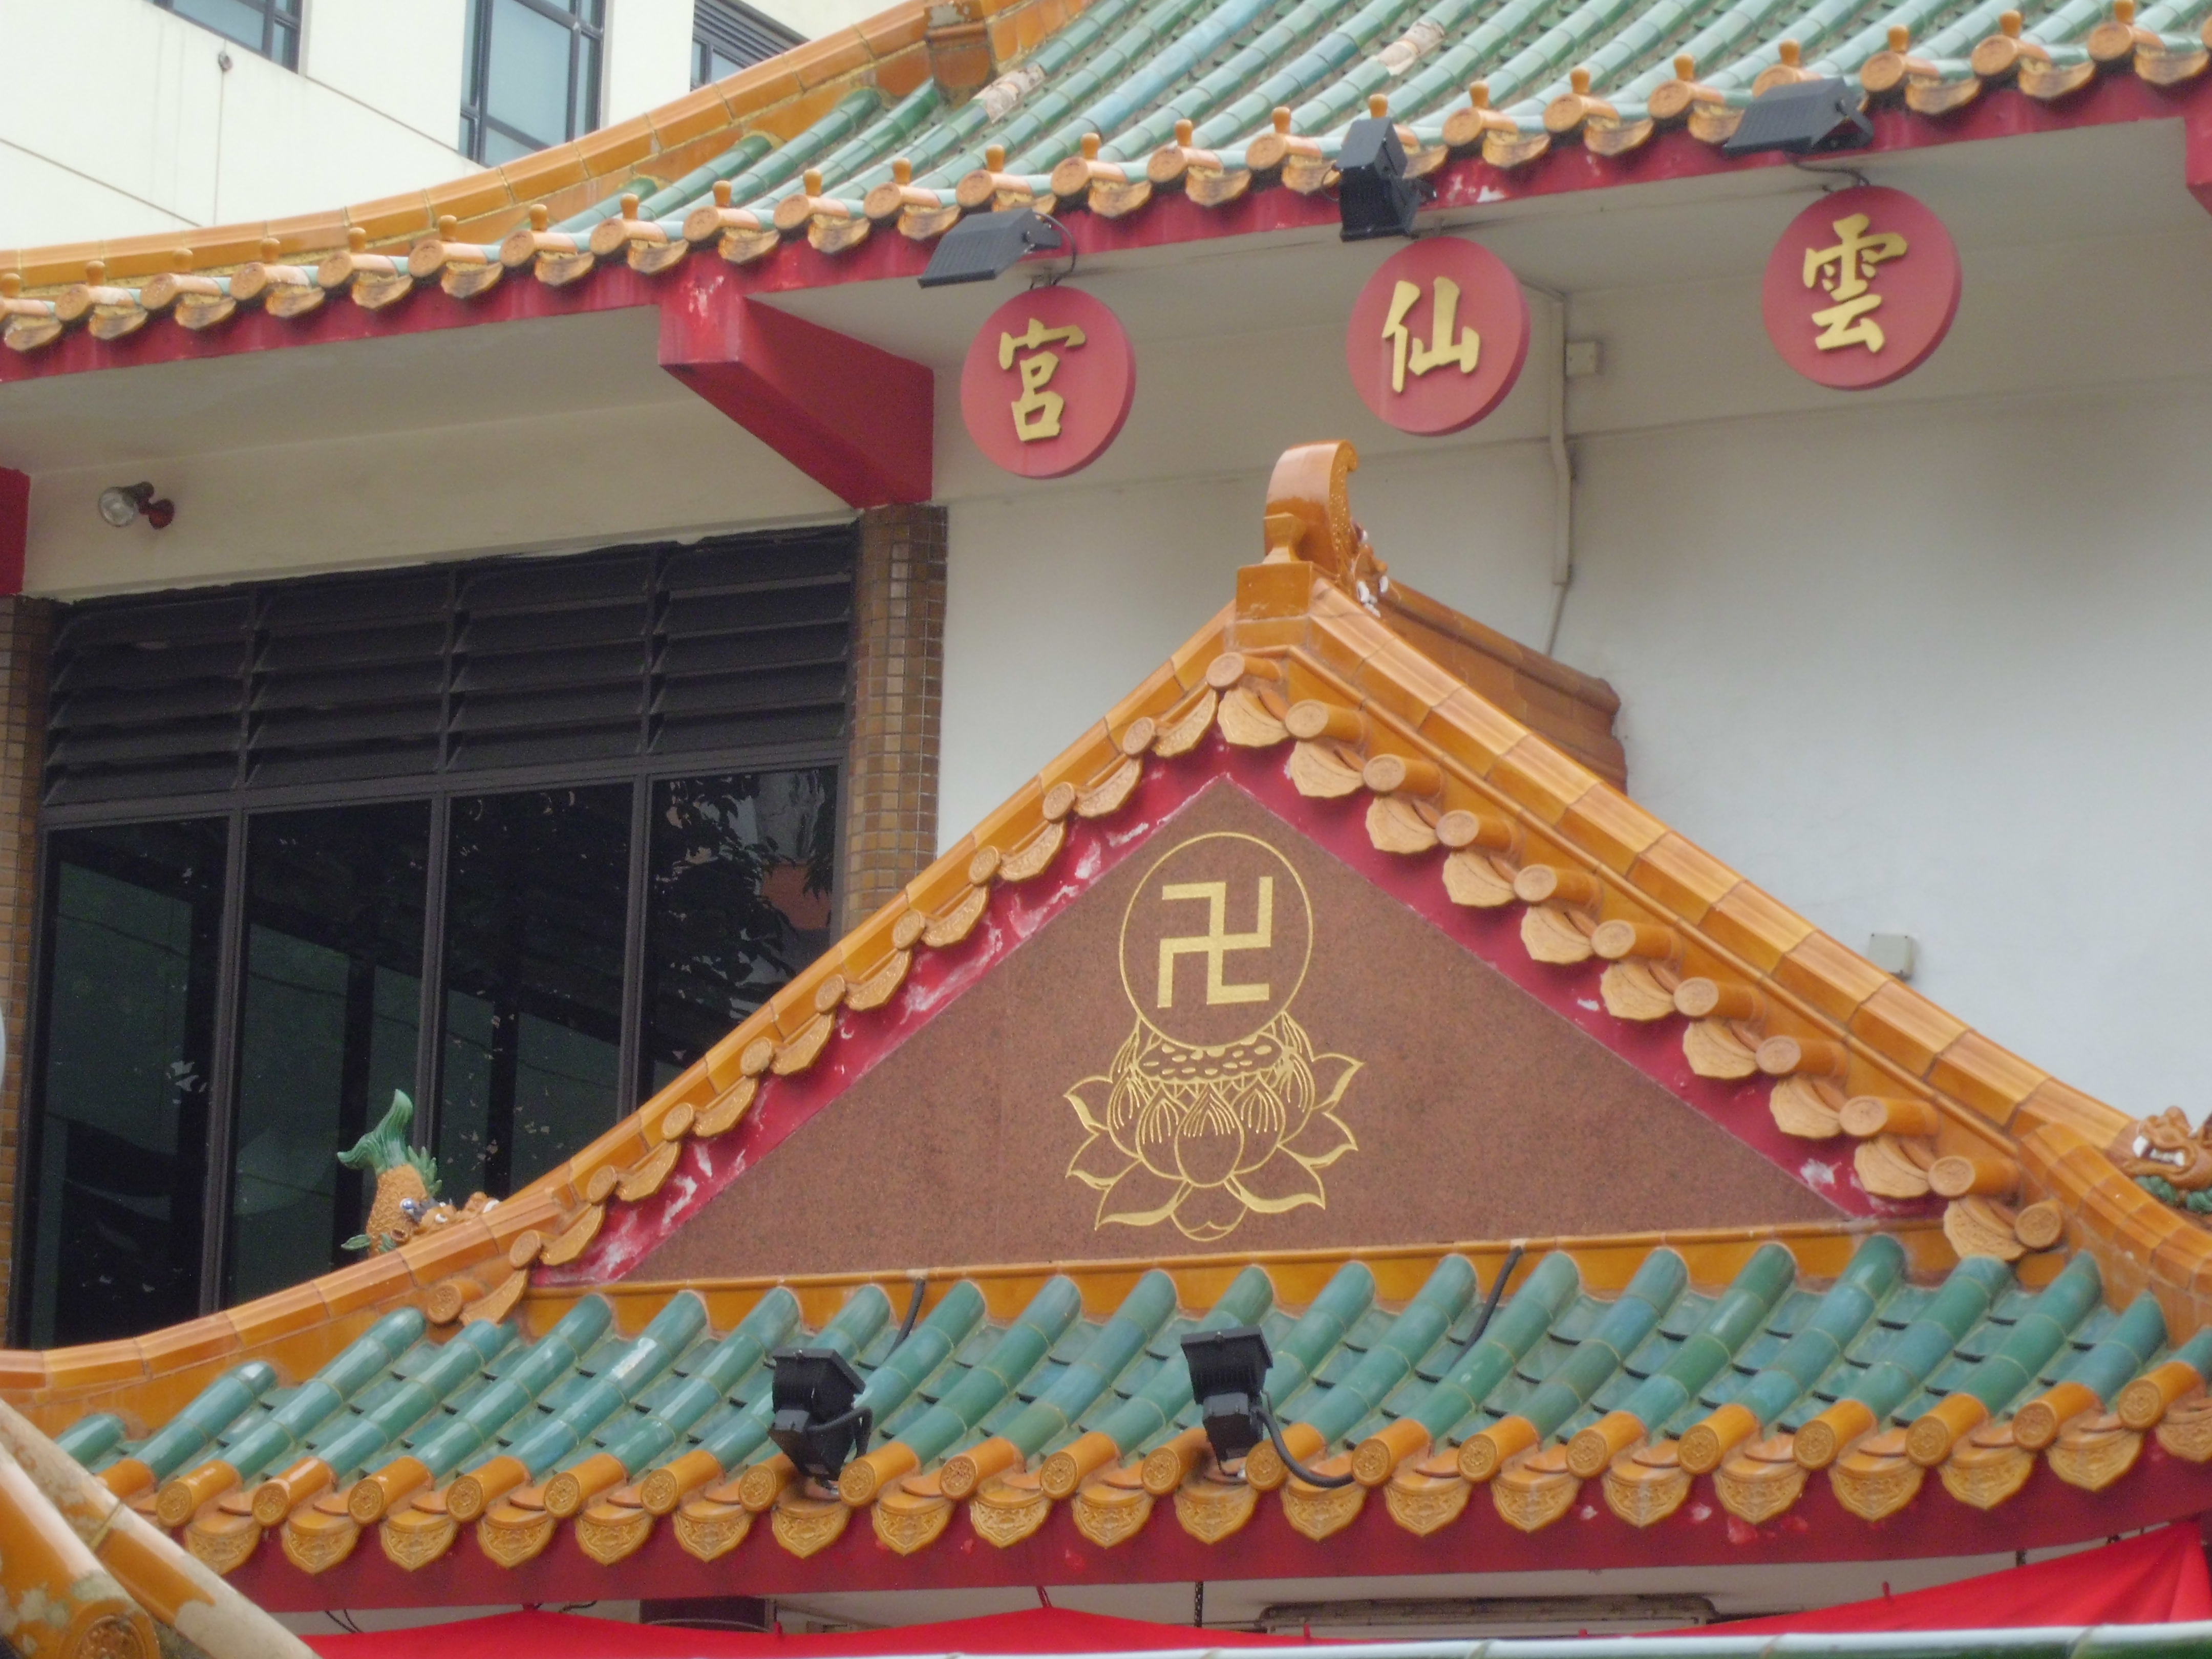 The swastika sign (卐)  –  a symbol of Buddhism or Nazism?